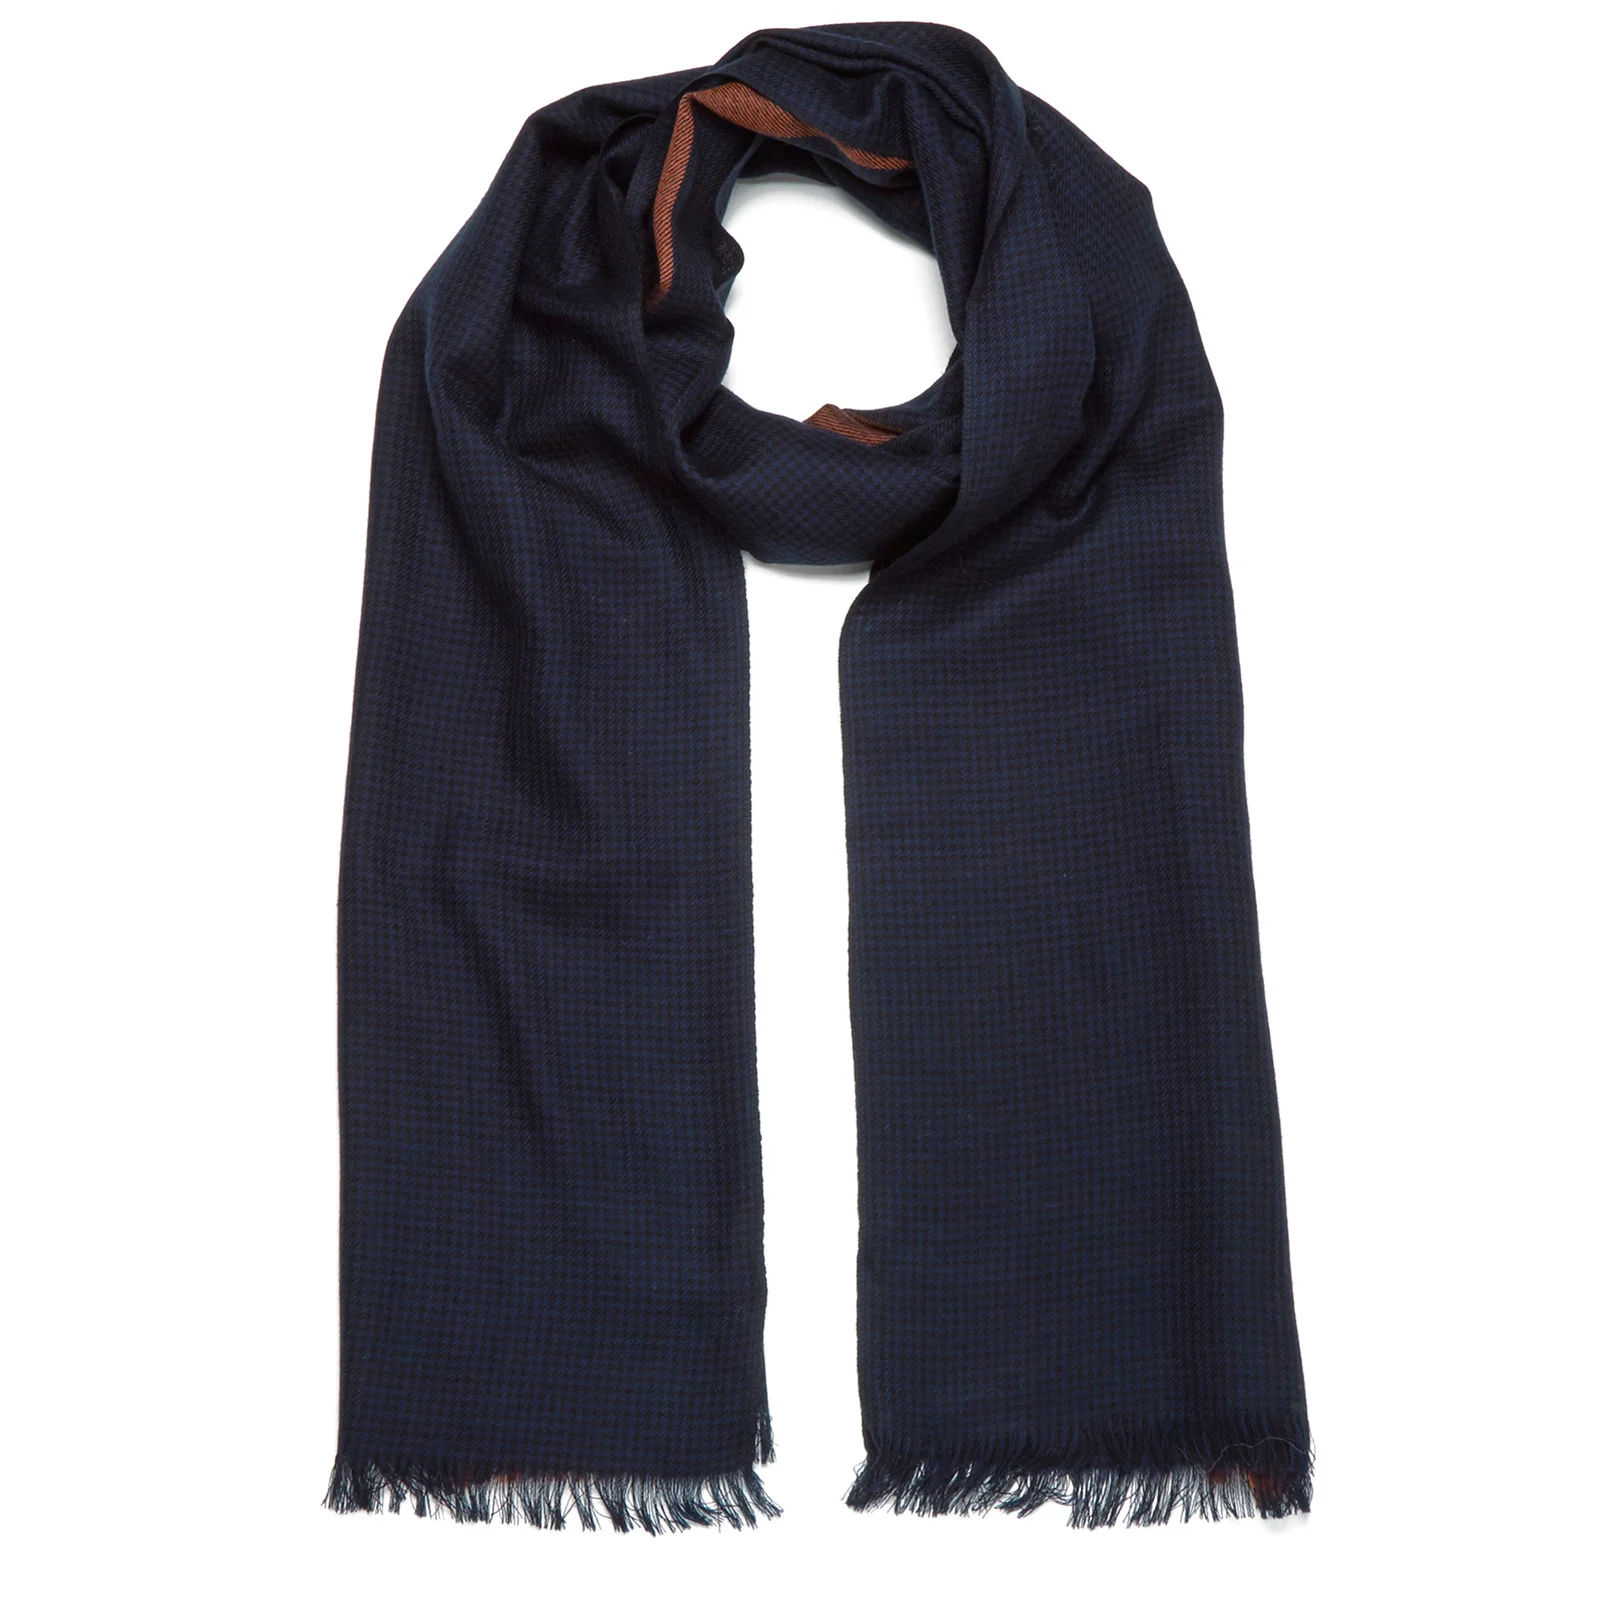 Paul Smith Accessories Men's Houndstooth Block Scarf - Navy Image 1